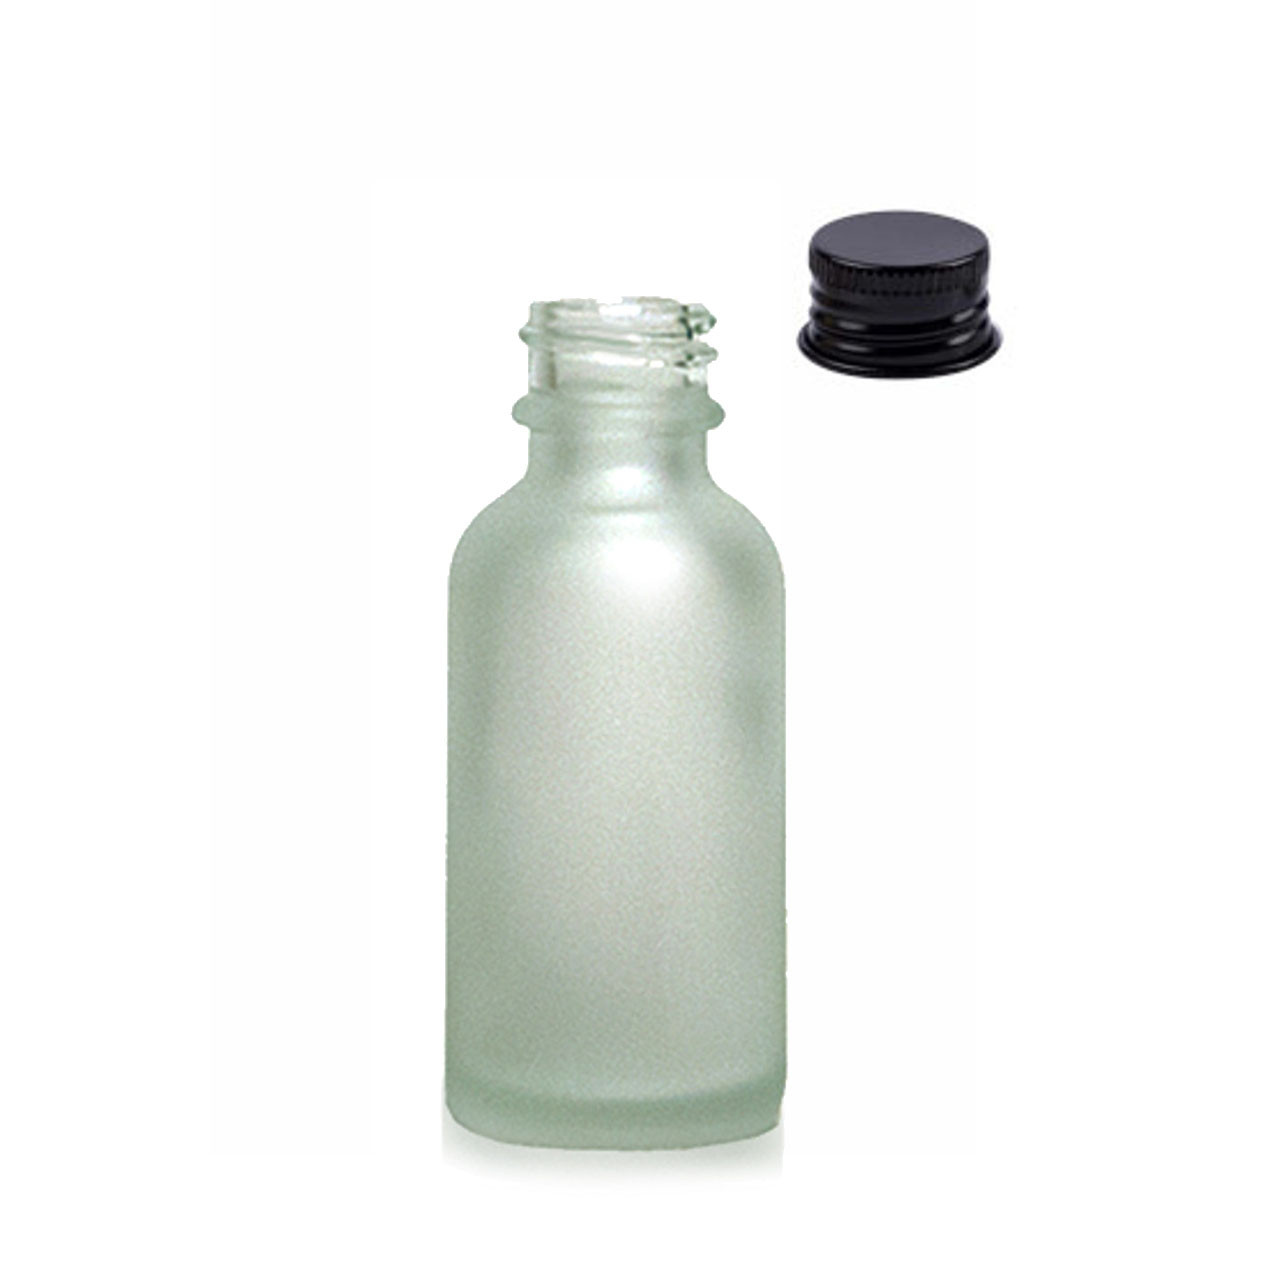 https://cdn11.bigcommerce.com/s-q04l7vhw25/images/stencil/1280x1280/products/1123/4229/2oz_forested_clear_with_black_cap__61796.1694191907.jpg?c=2